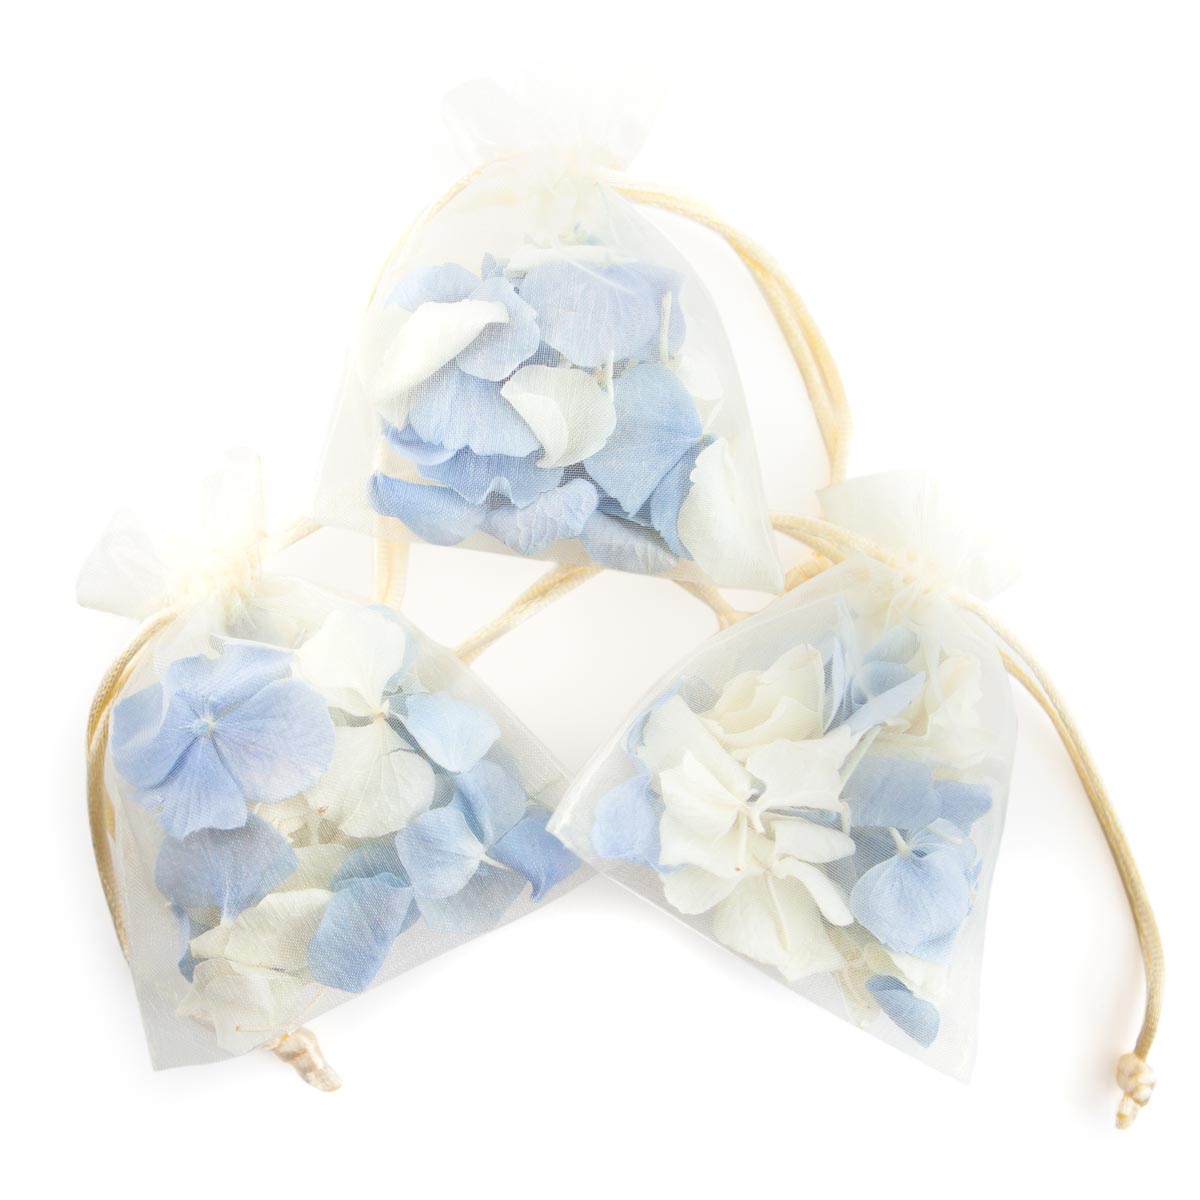 Three Hydrangea Petal Confetti Bags with blue and white mixed petals